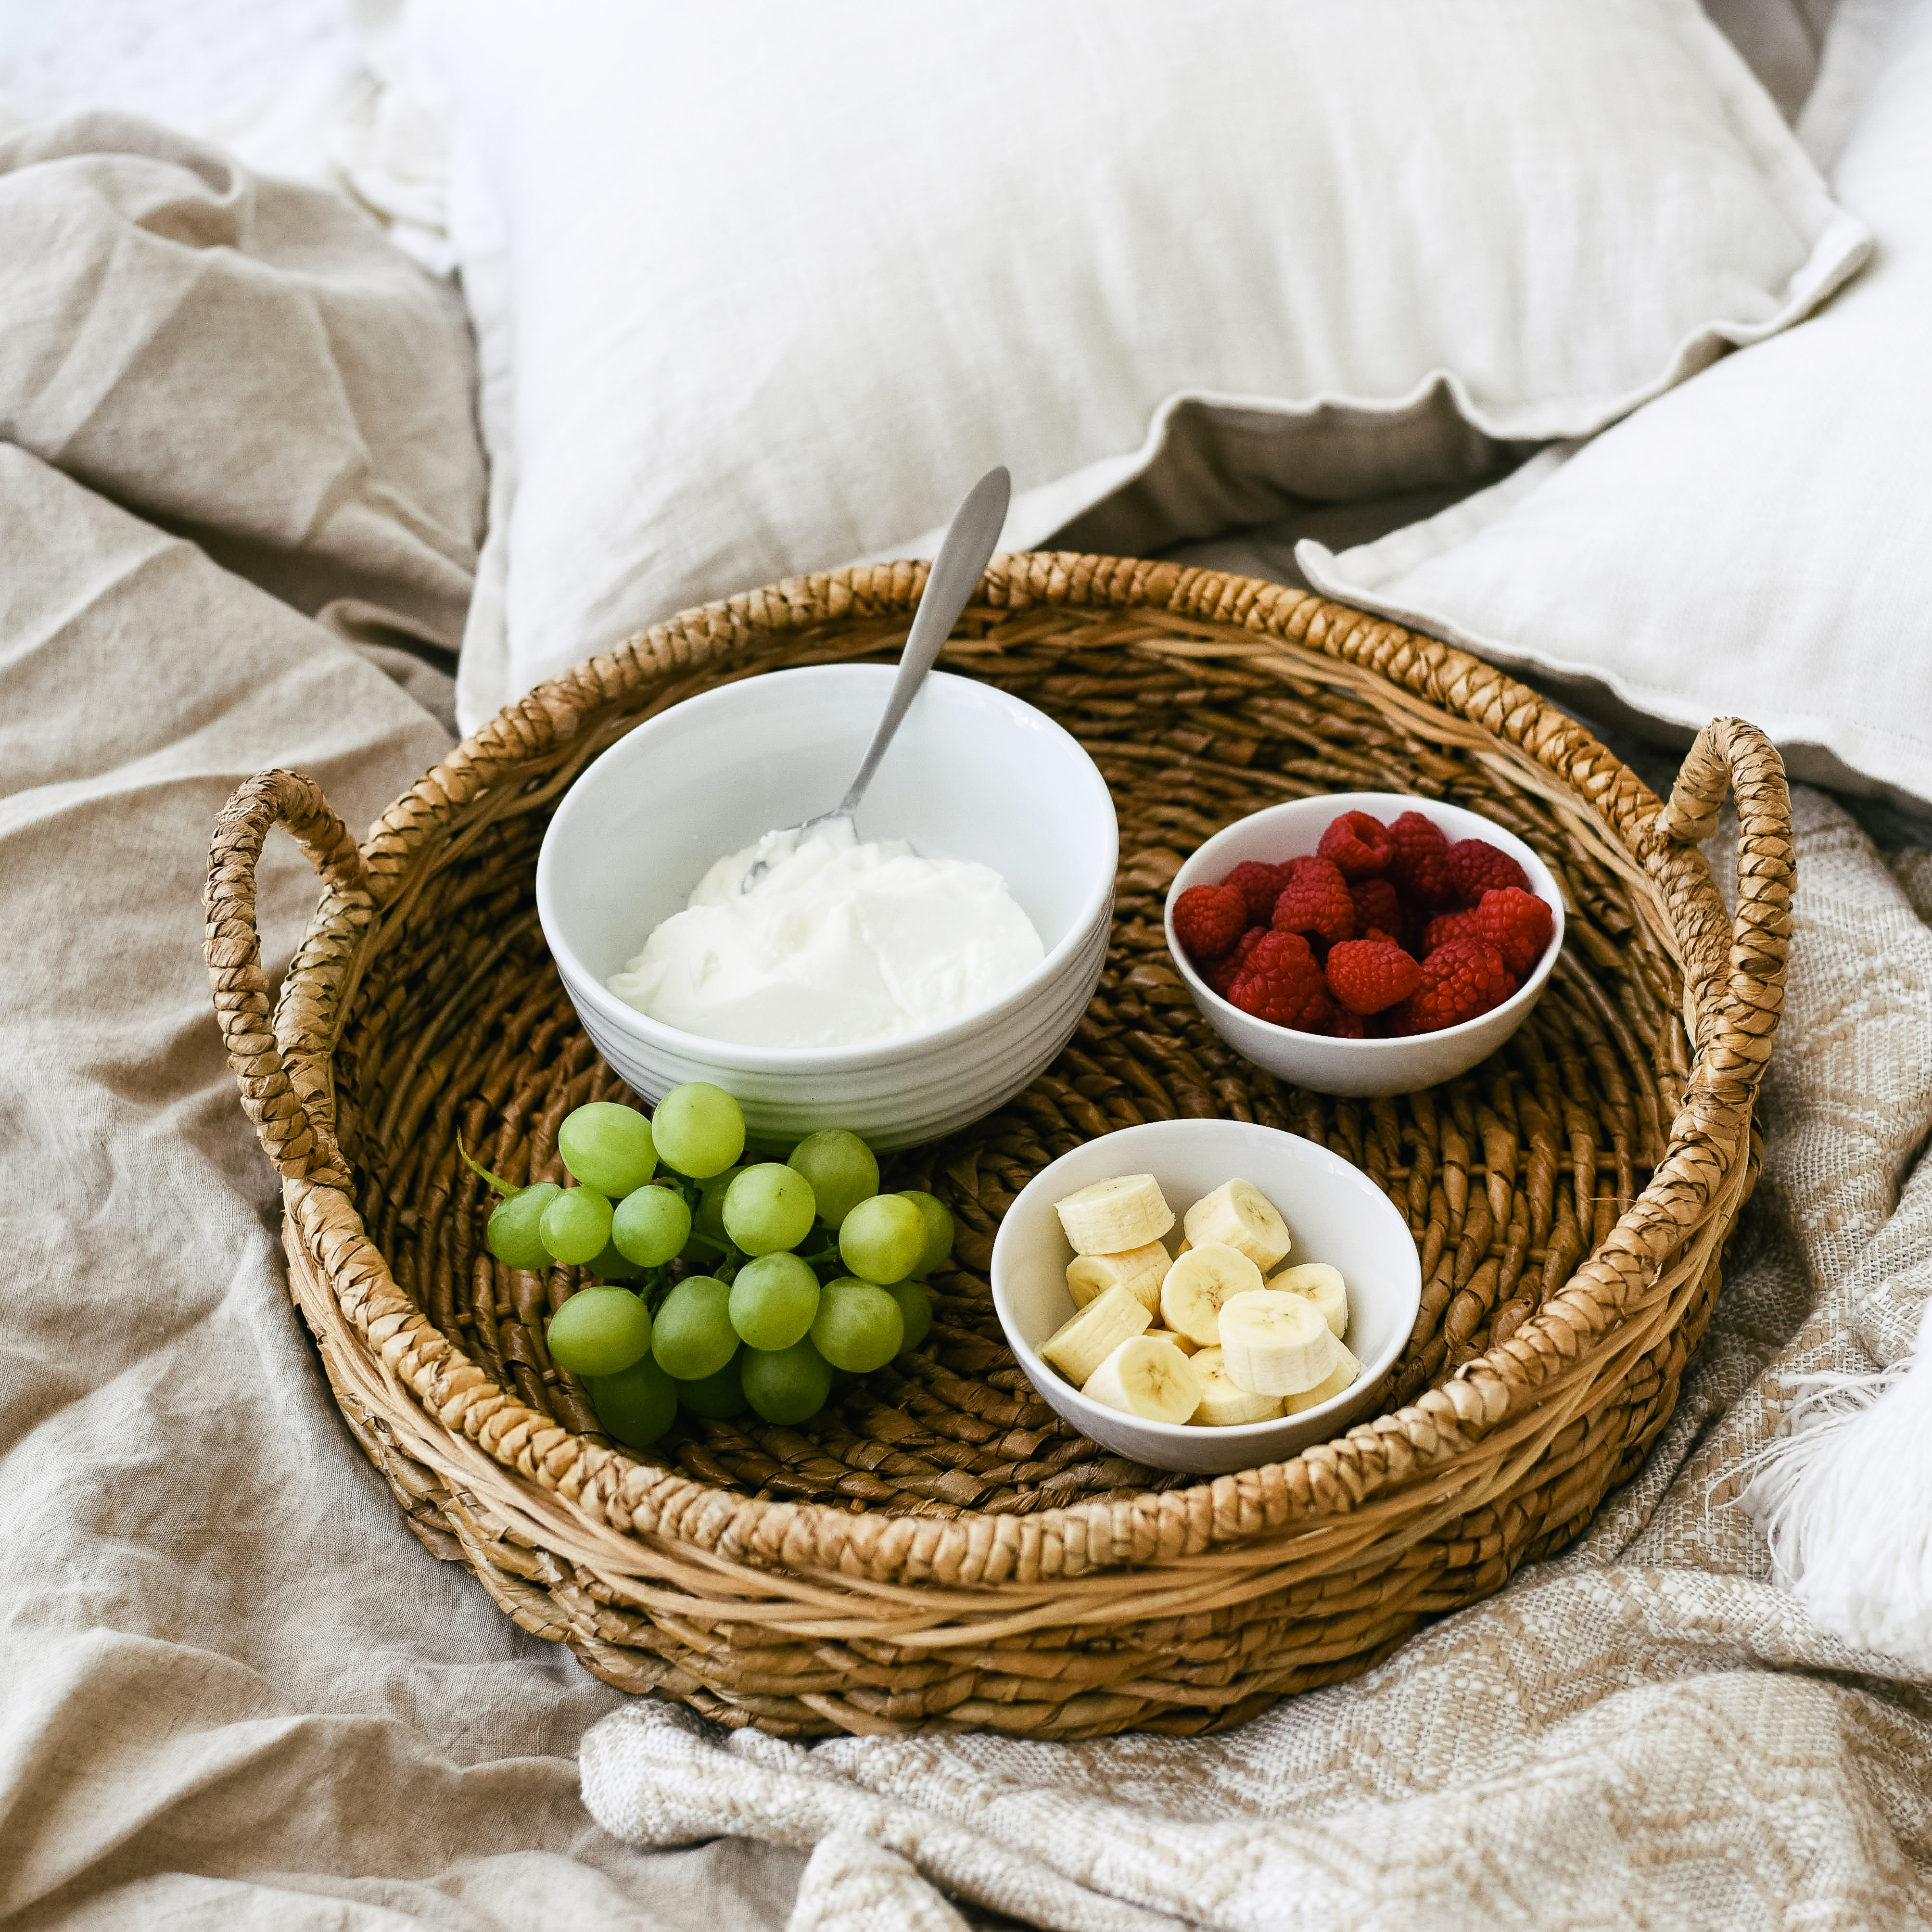 White-plate-grapes-sliced-banana-and-strawberry-in-a-round-basket-on-a-white-bed